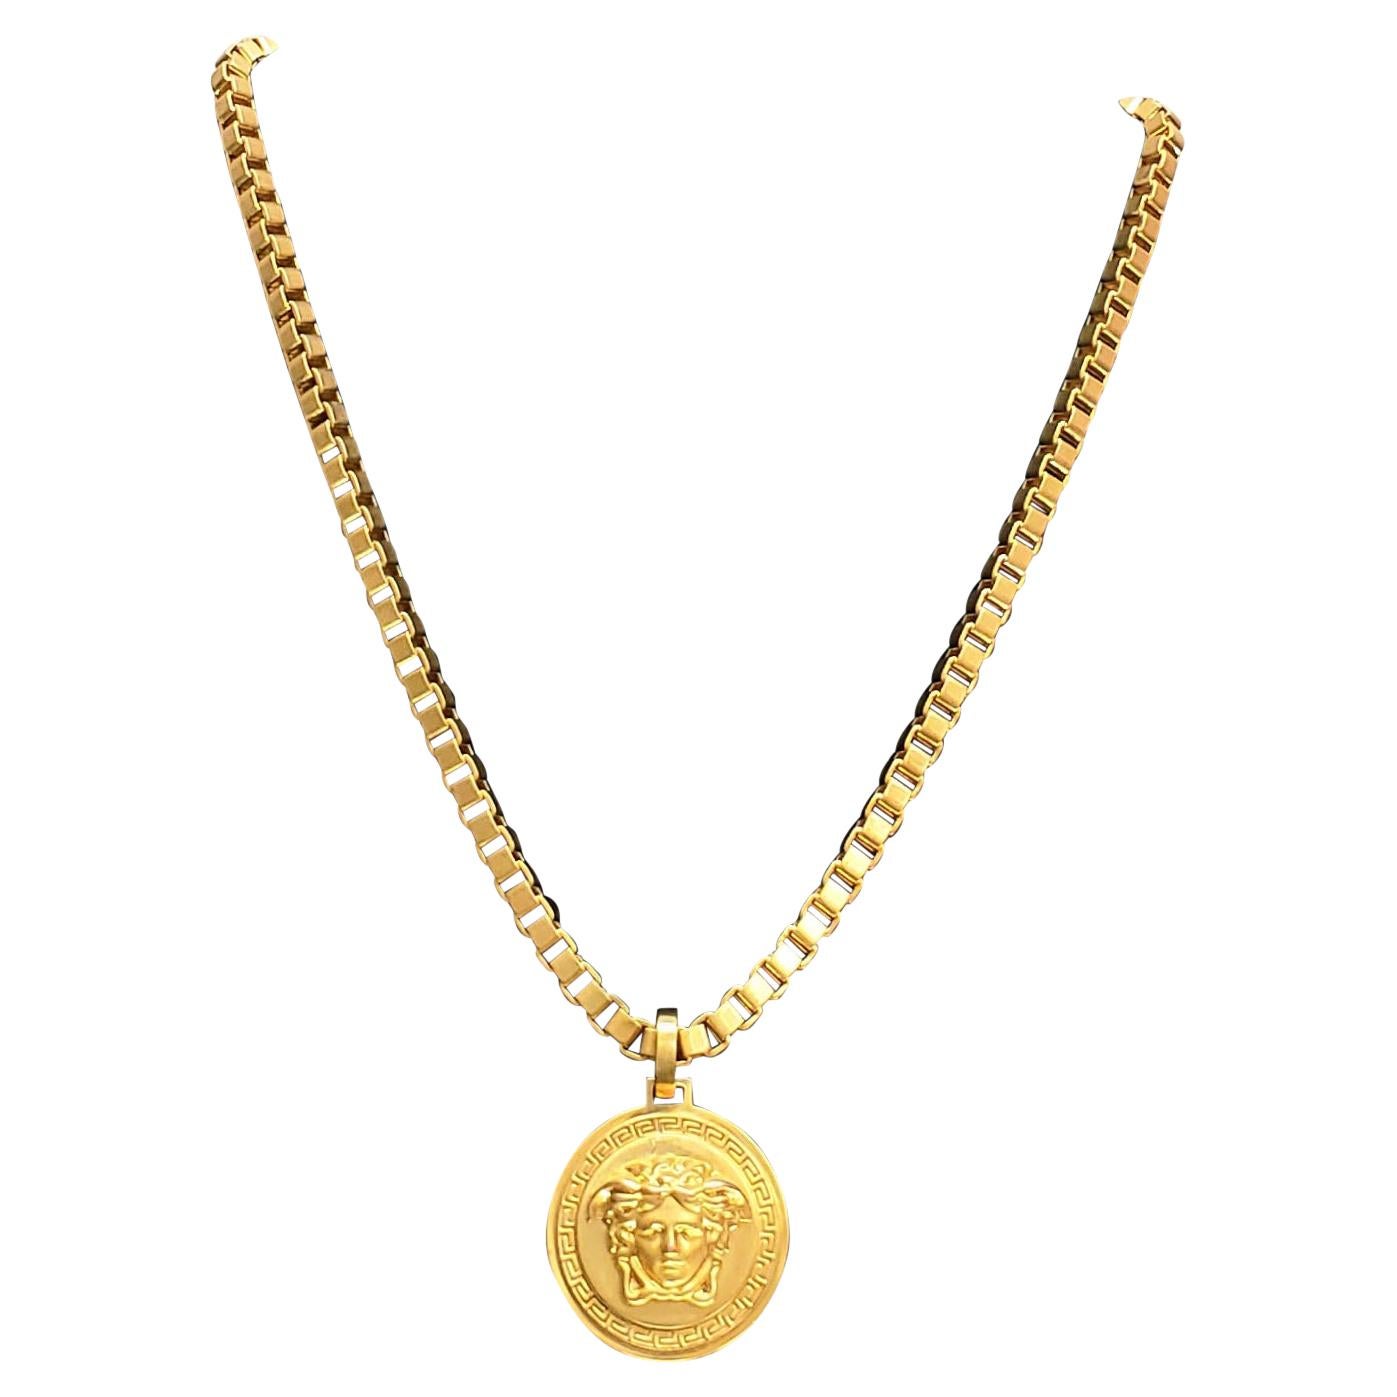 New VERSACE 24K GOLD PLATED MEDUSA CHAIN NECKLACE For Sale at 1stDibs |  medusa necklace versace, versace gold necklace, versace gold pendant